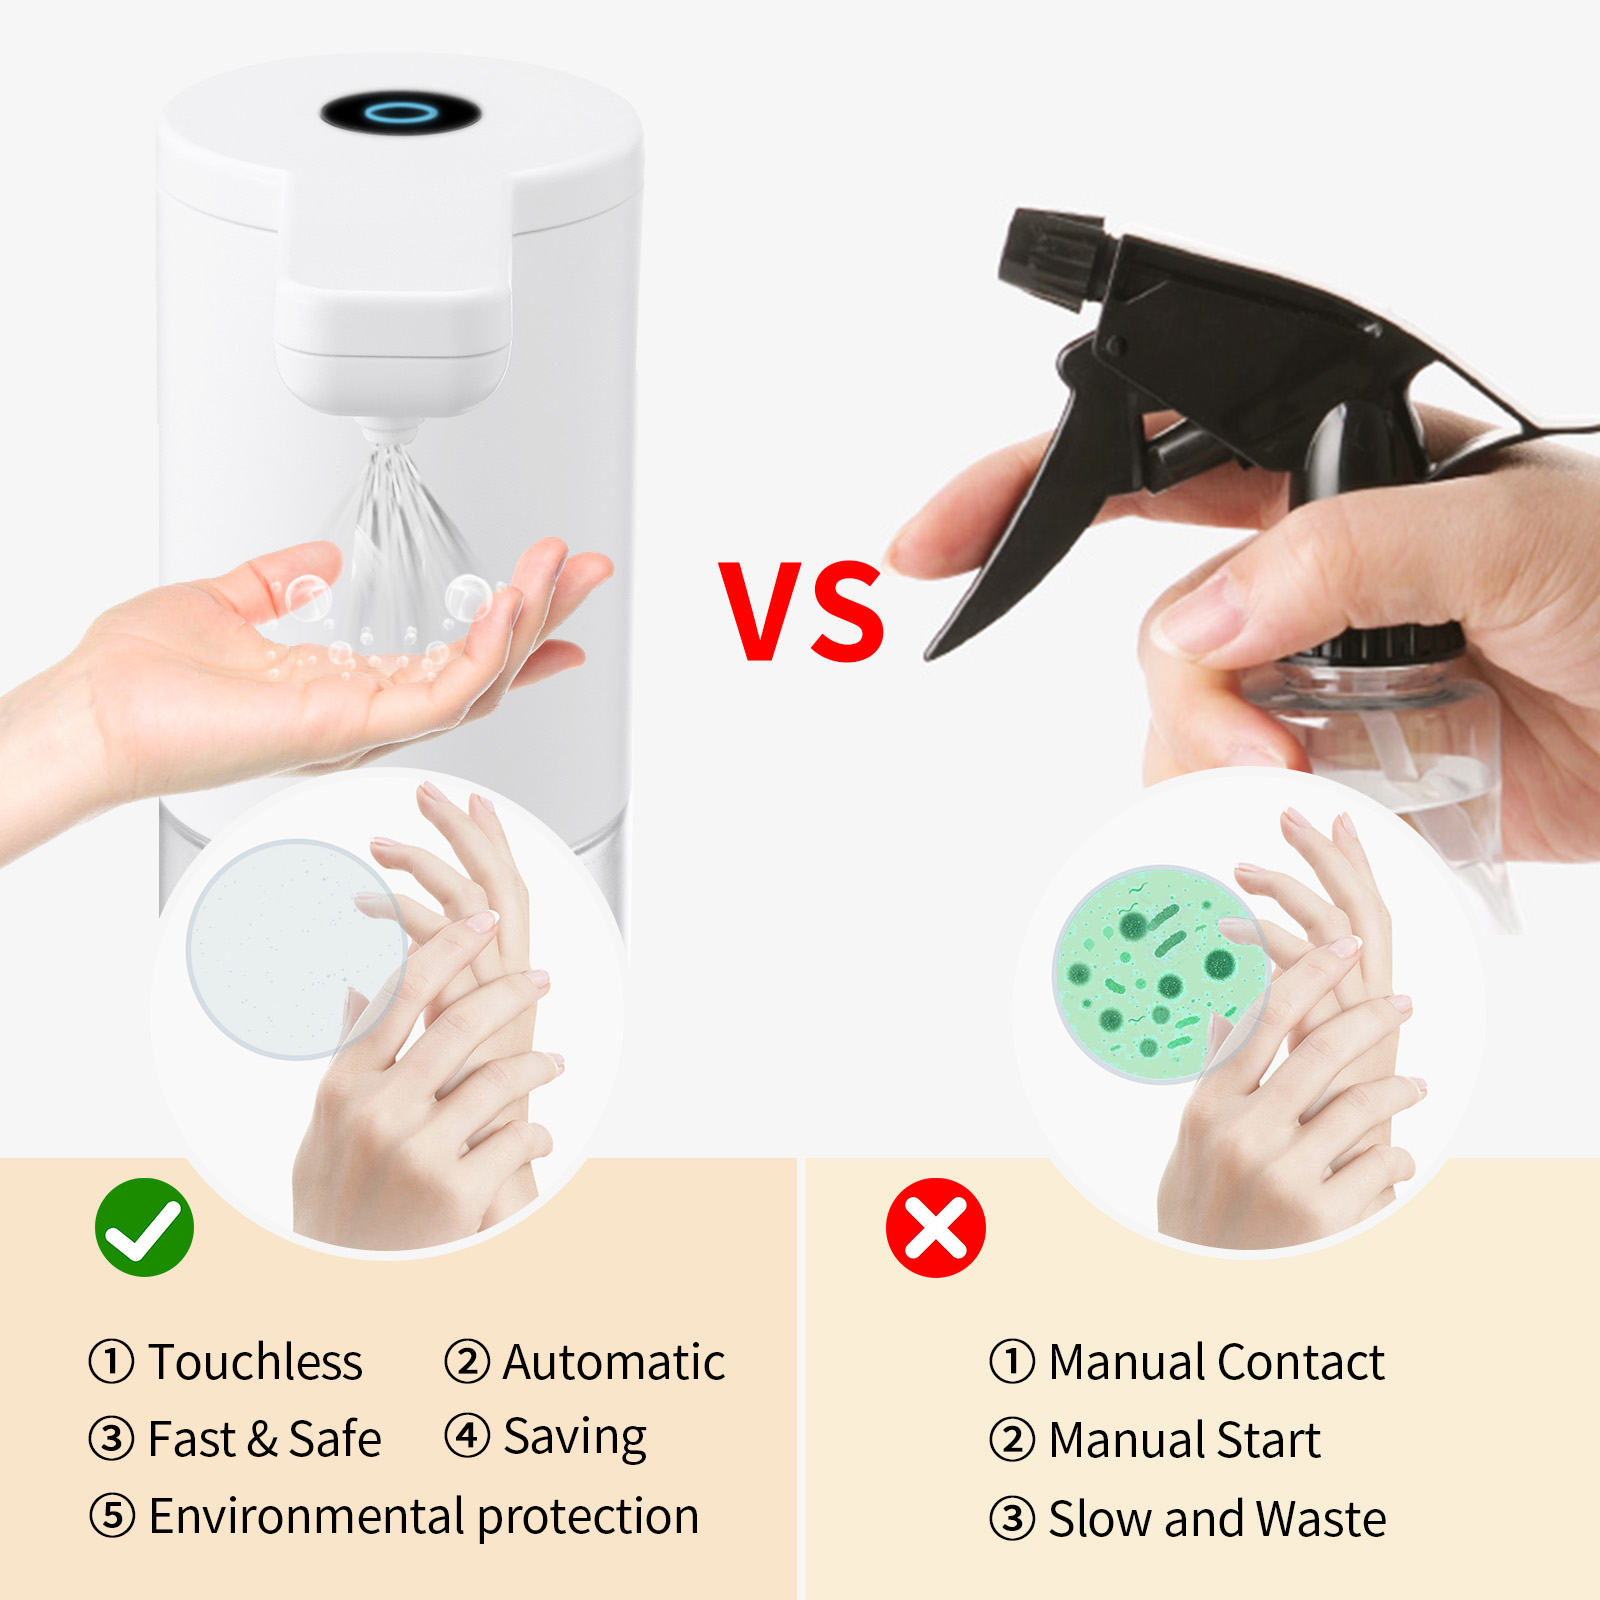 KING-DO-WAY-280ml-Automatic-Contactless-Soap-Dispenser-280ml-Smart-Touchless-Soap-Disinfectant-Dispe-1890640-7